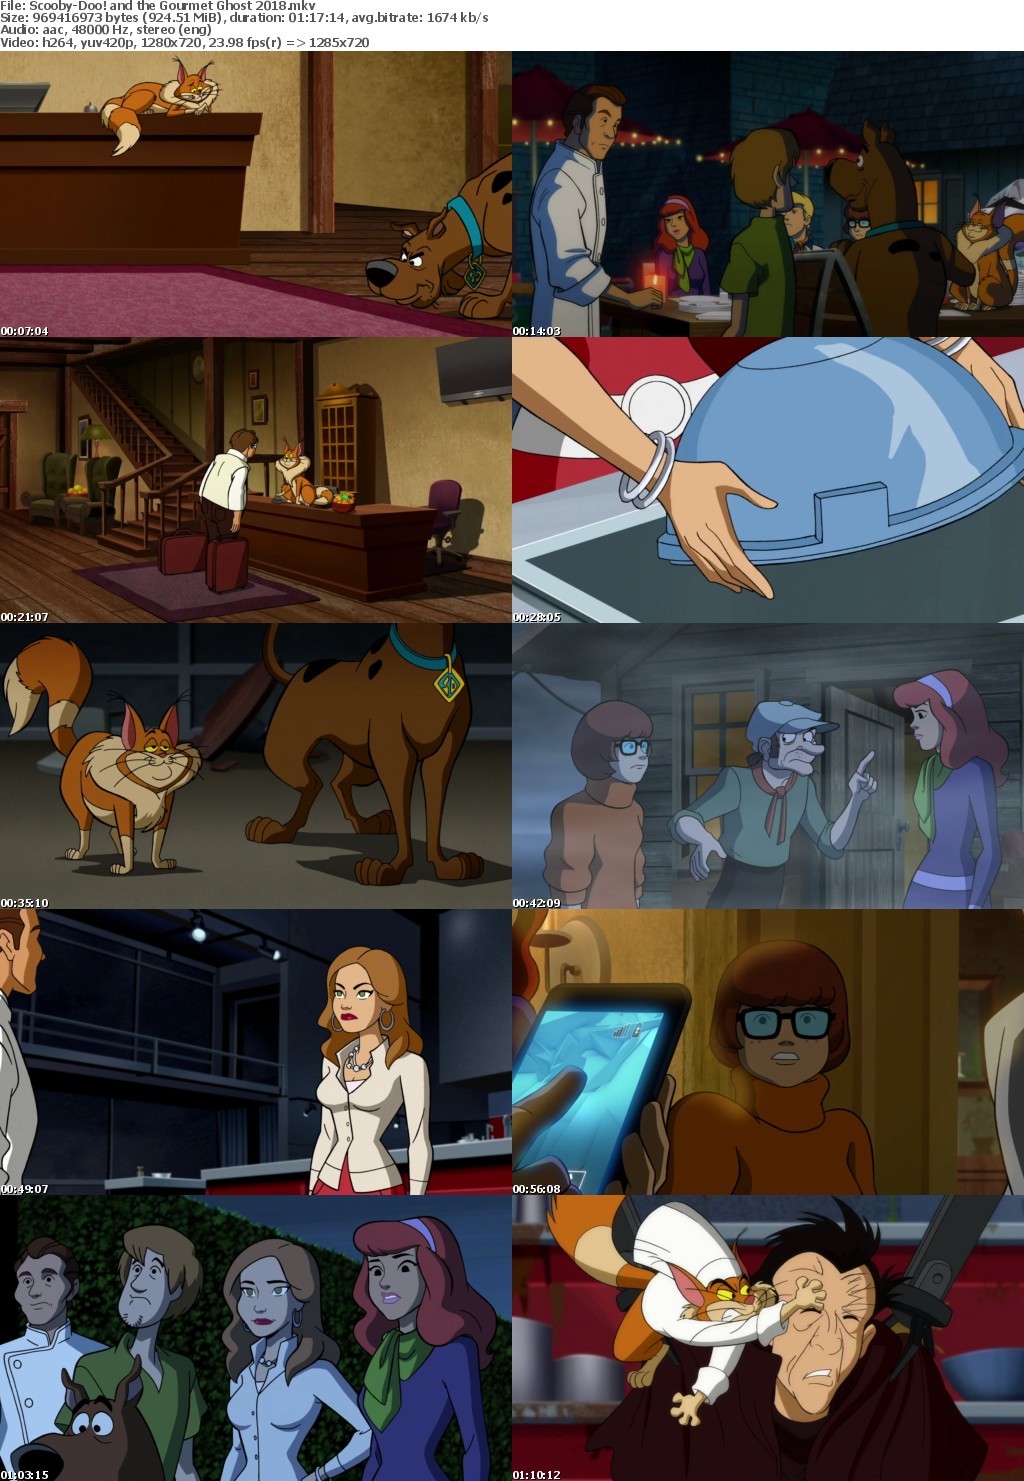 Scooby-Doo and the Gourmet Ghost 2018 720p WEBRip x264 i c